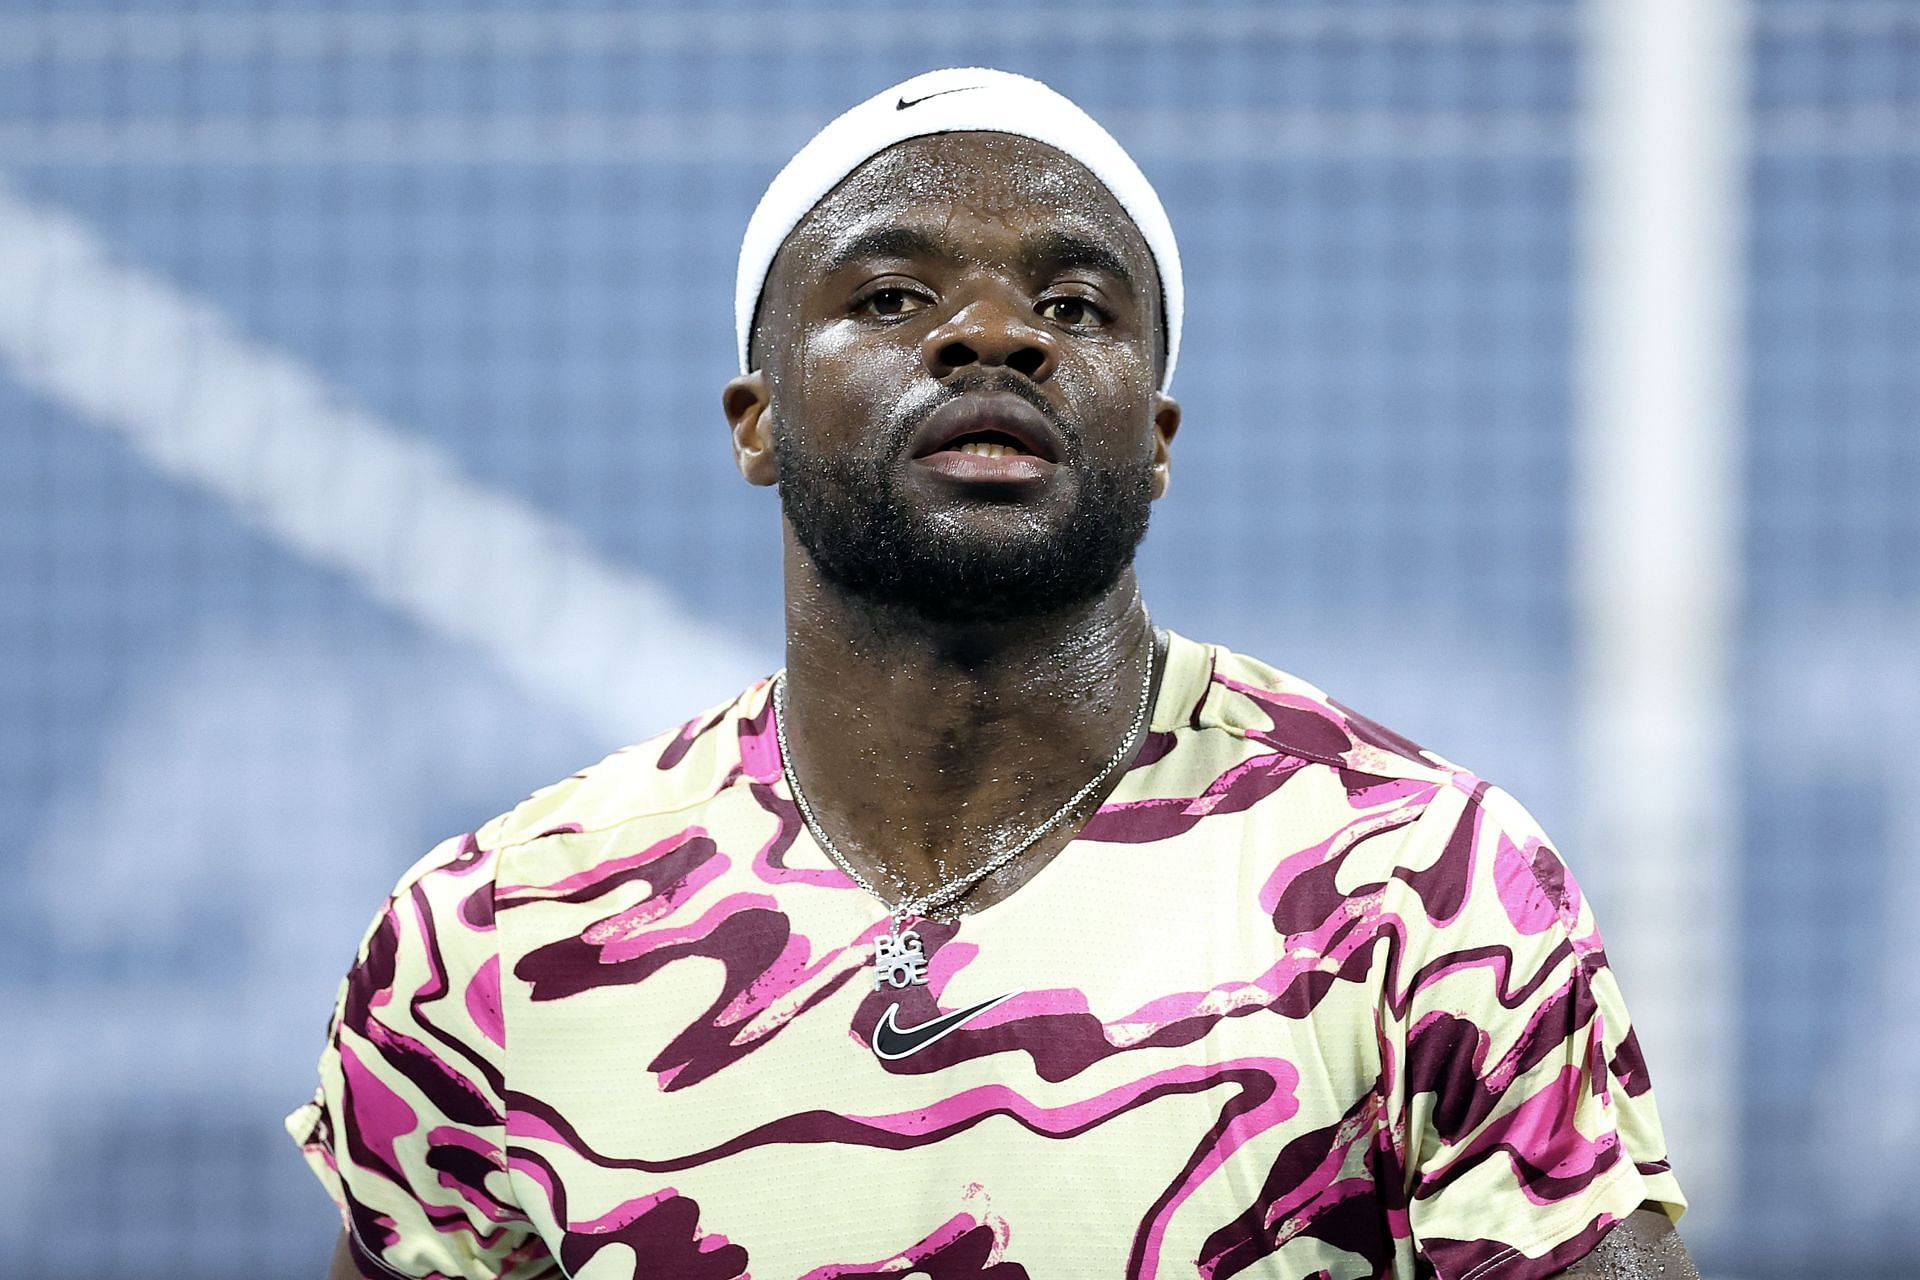 Frances Tiafoe pictured at the 2023 Miami Open - Day 7.